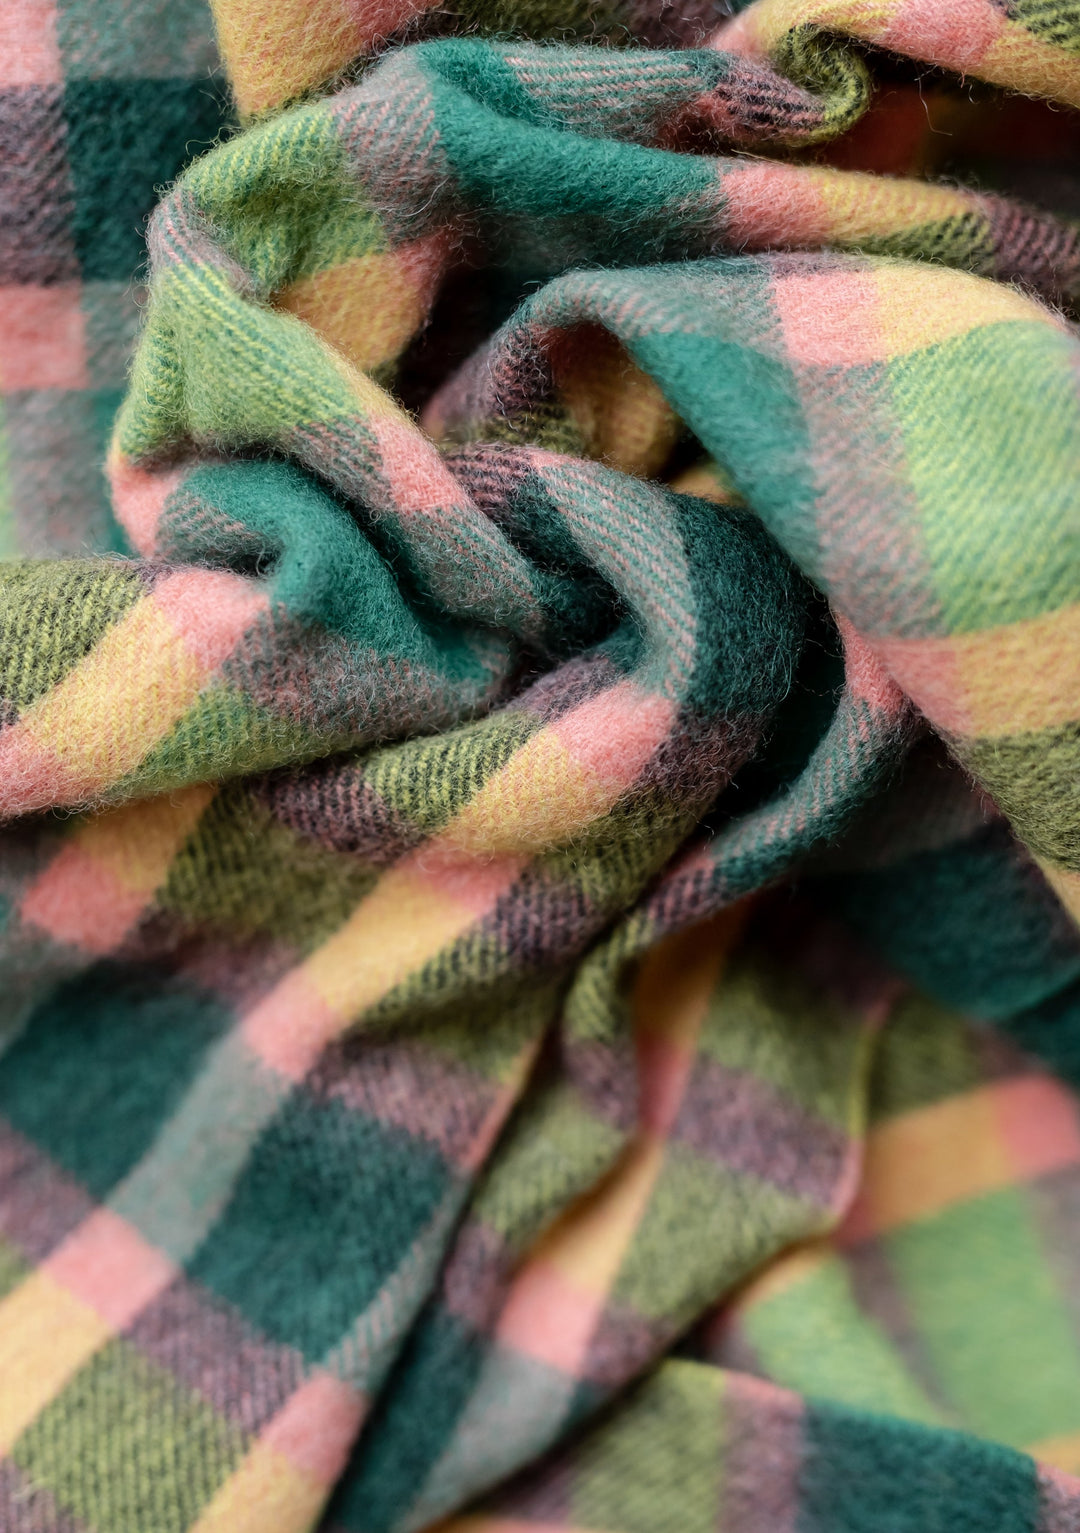 Lambswool Oversized Scarf in Lime Multi Check